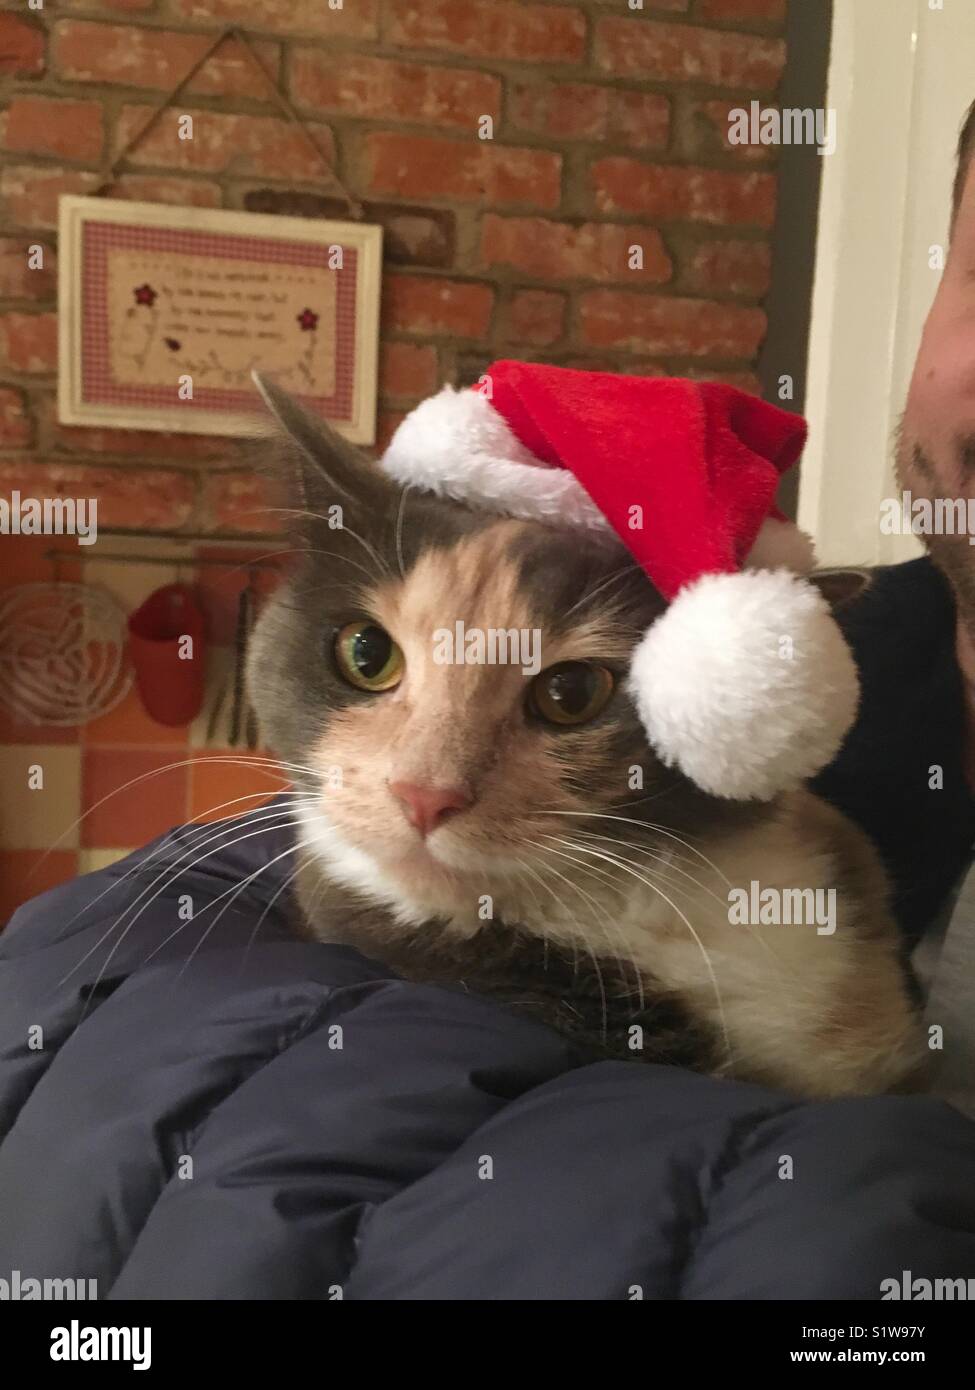 Peach and grey cat in a Christmas hat Stock Photo